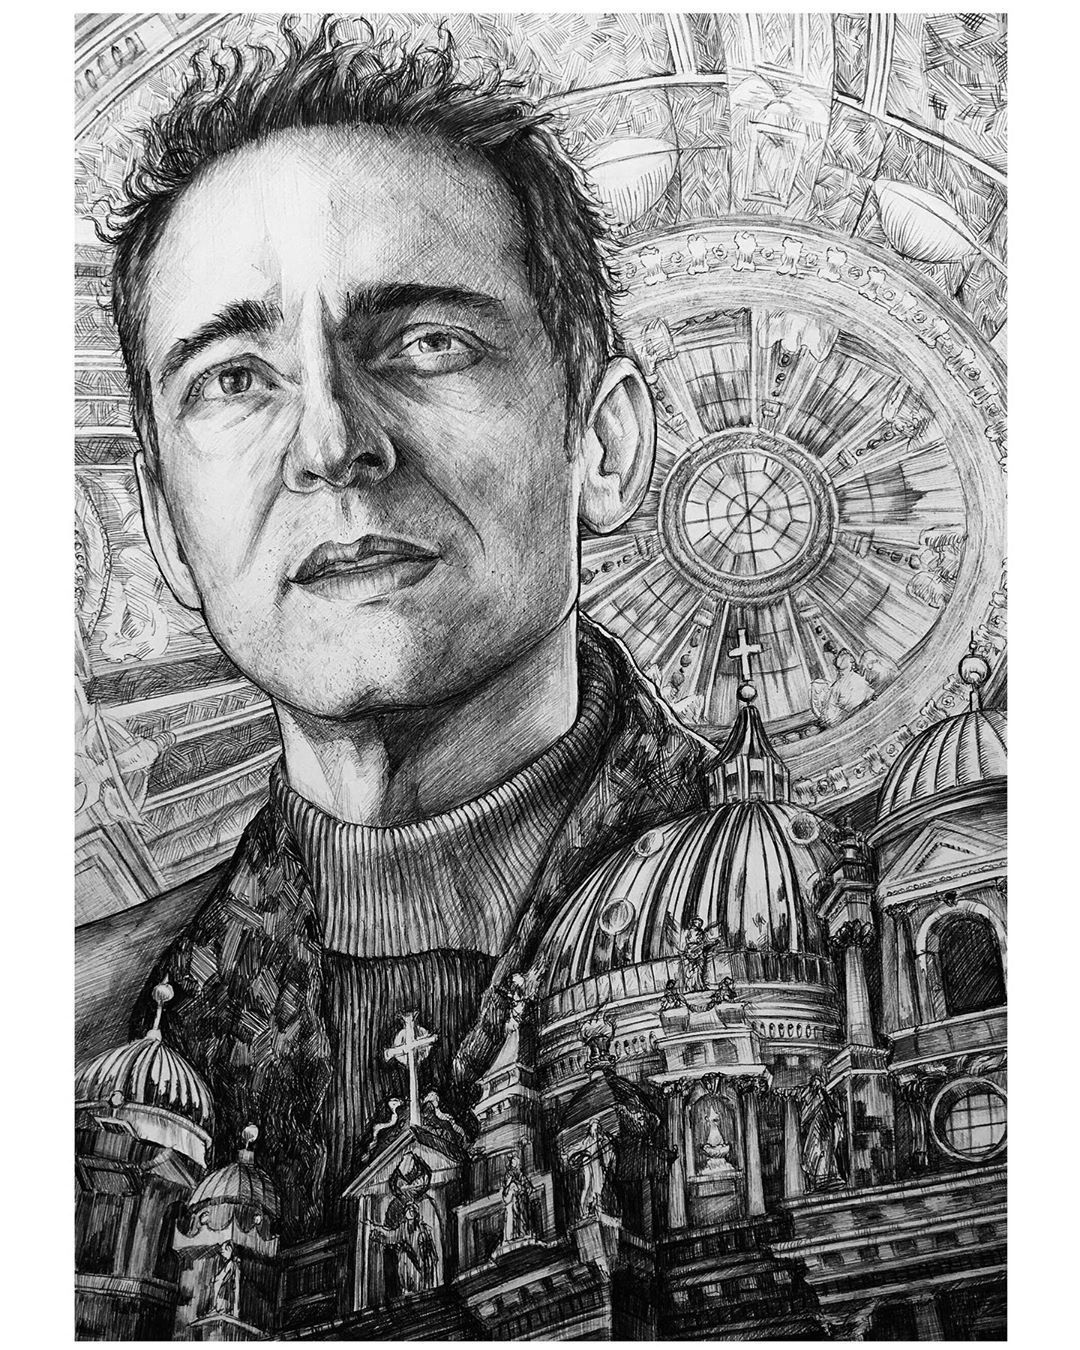 Berlín from Money Heist, and the building is inspired by the Berlin Cathedral ⛪️ A3, ballpoint pen. IG -> alexzajfert | tumblr @alexzajfert ————————————————- Thanks for submitting! 💥Follow @eatsleepdraw on Instagram for more Inspiration &...